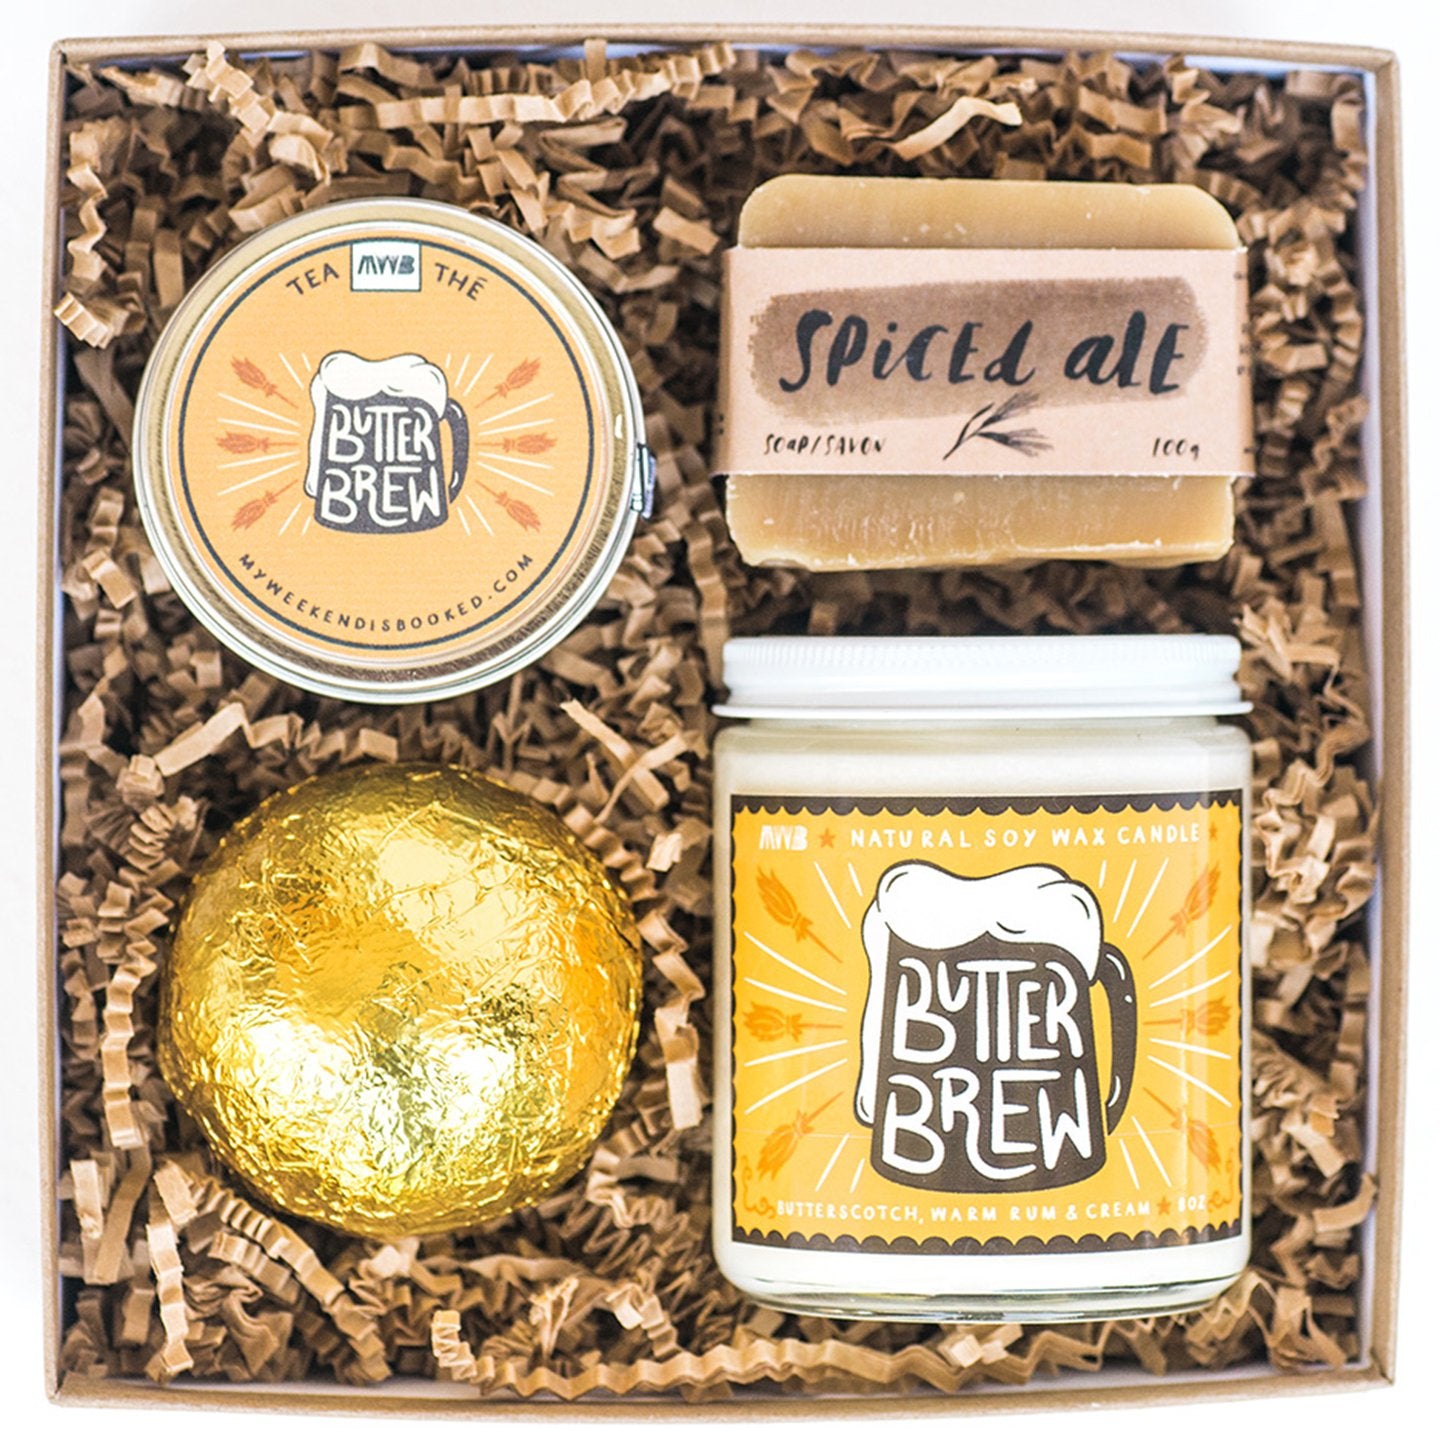 butterbeer curated gift box gifts for beer lovers my weekend is booked client gift ideas 